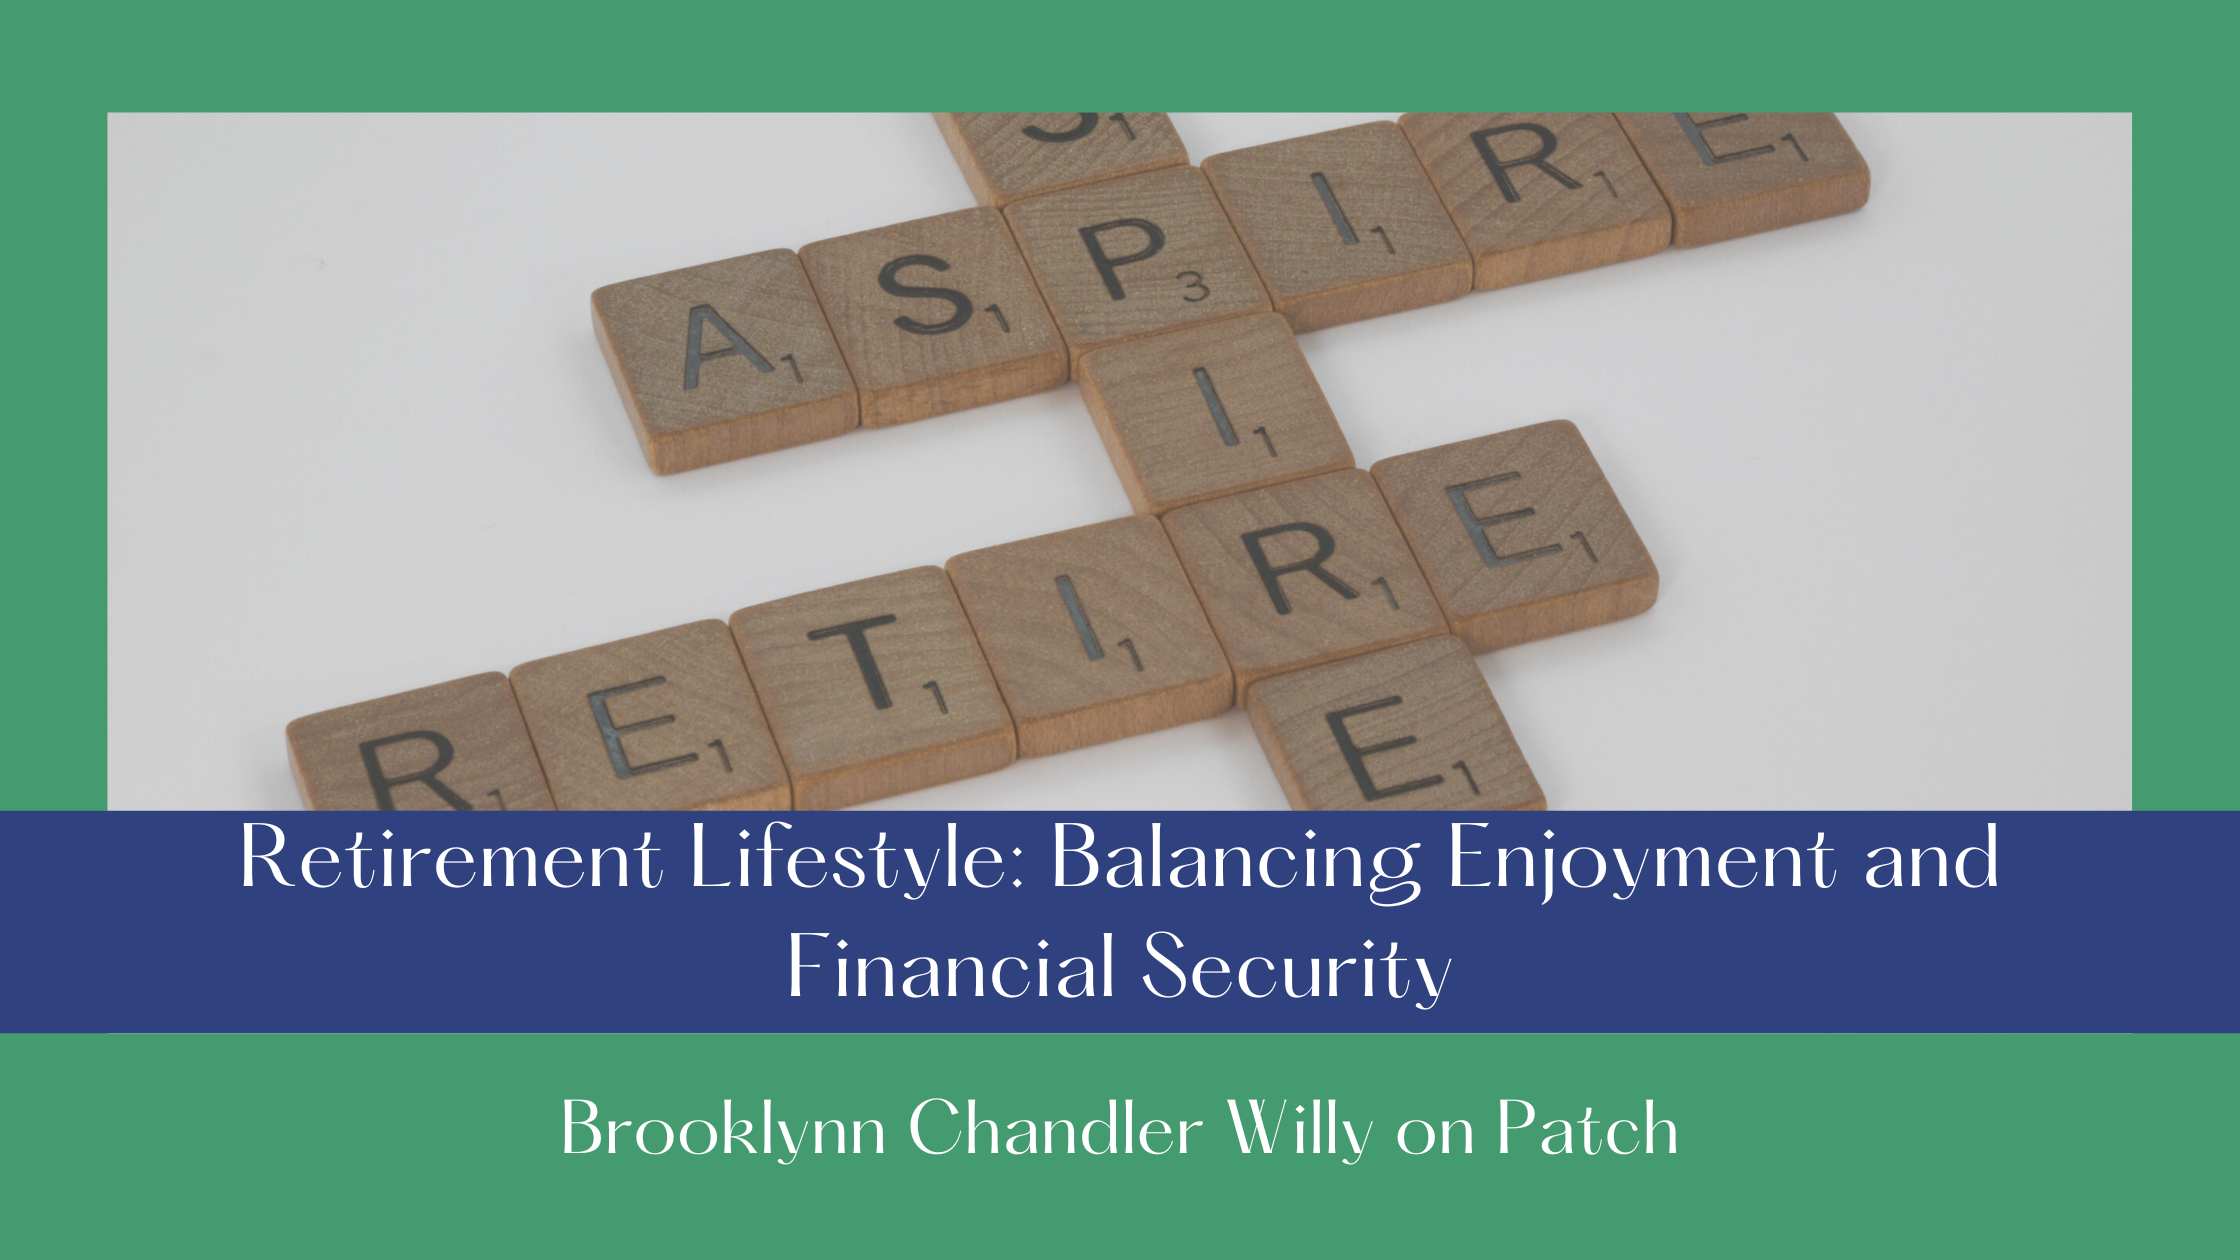 Retirement Lifestyle: Balancing Enjoyment and
Financial Security

Brooklvnn Chandler Willy on Patch